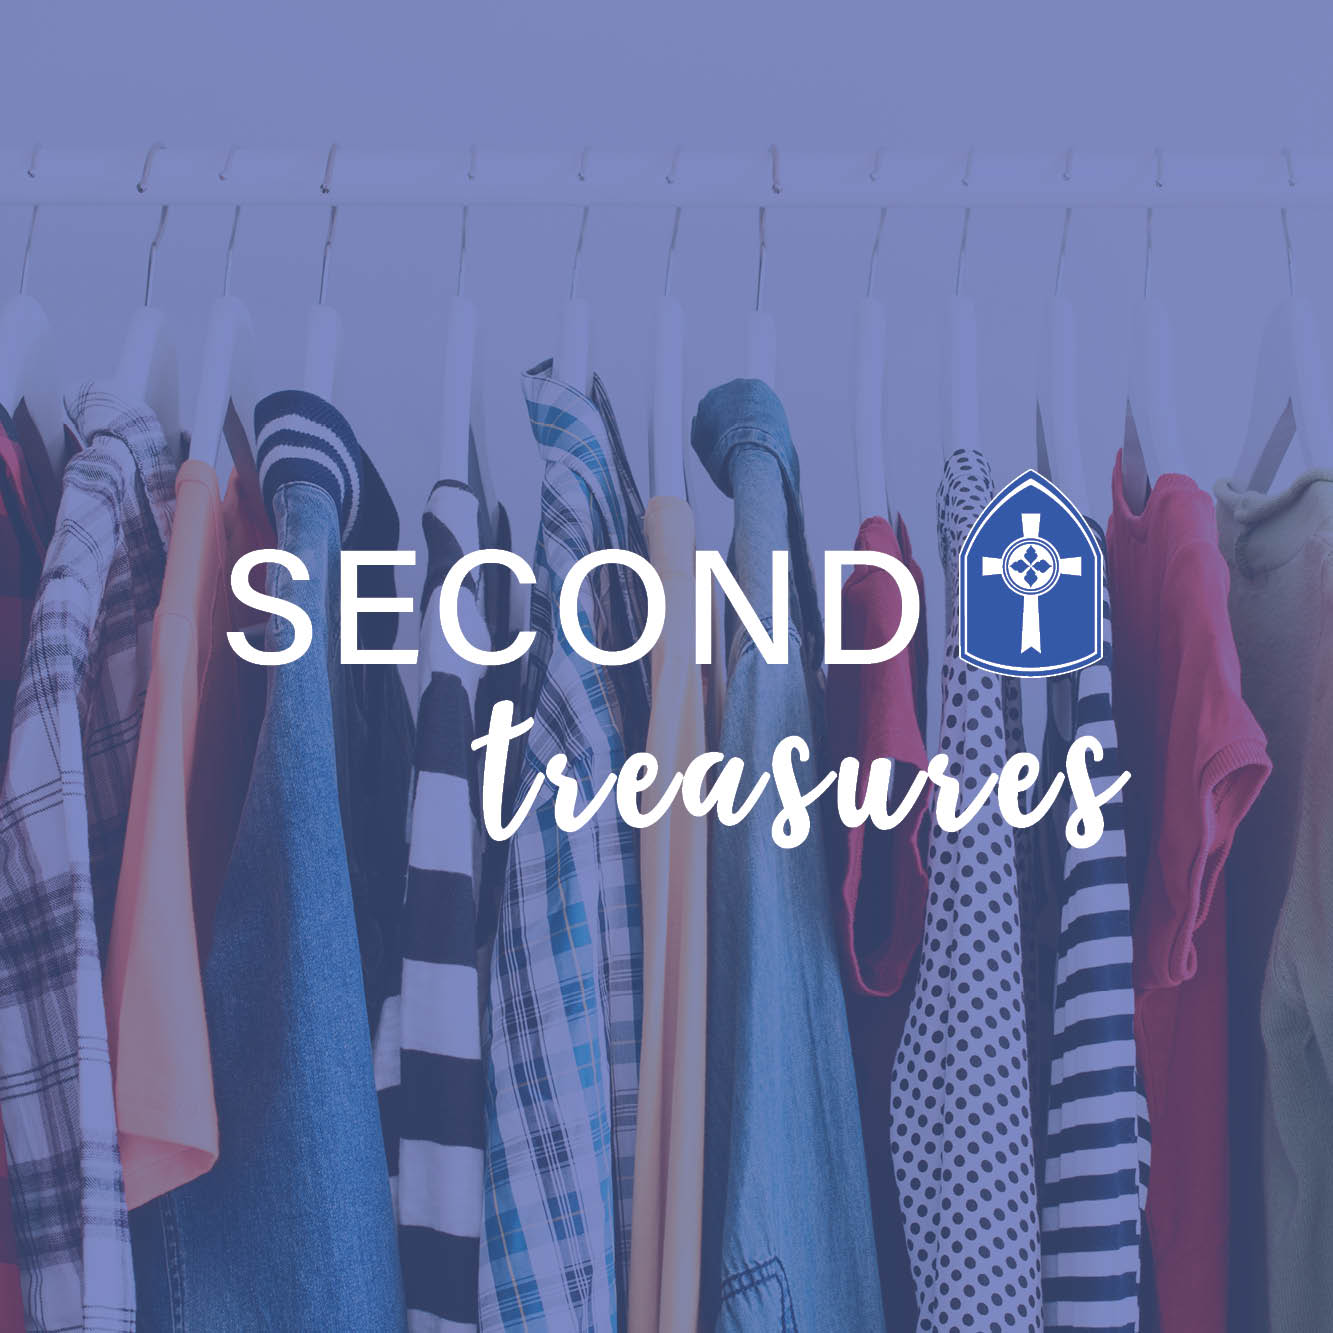 Opening April 21, 2024!
Make a clothing donation or help Women@Second prepare our upcoming thrift store, Second Treasures.
